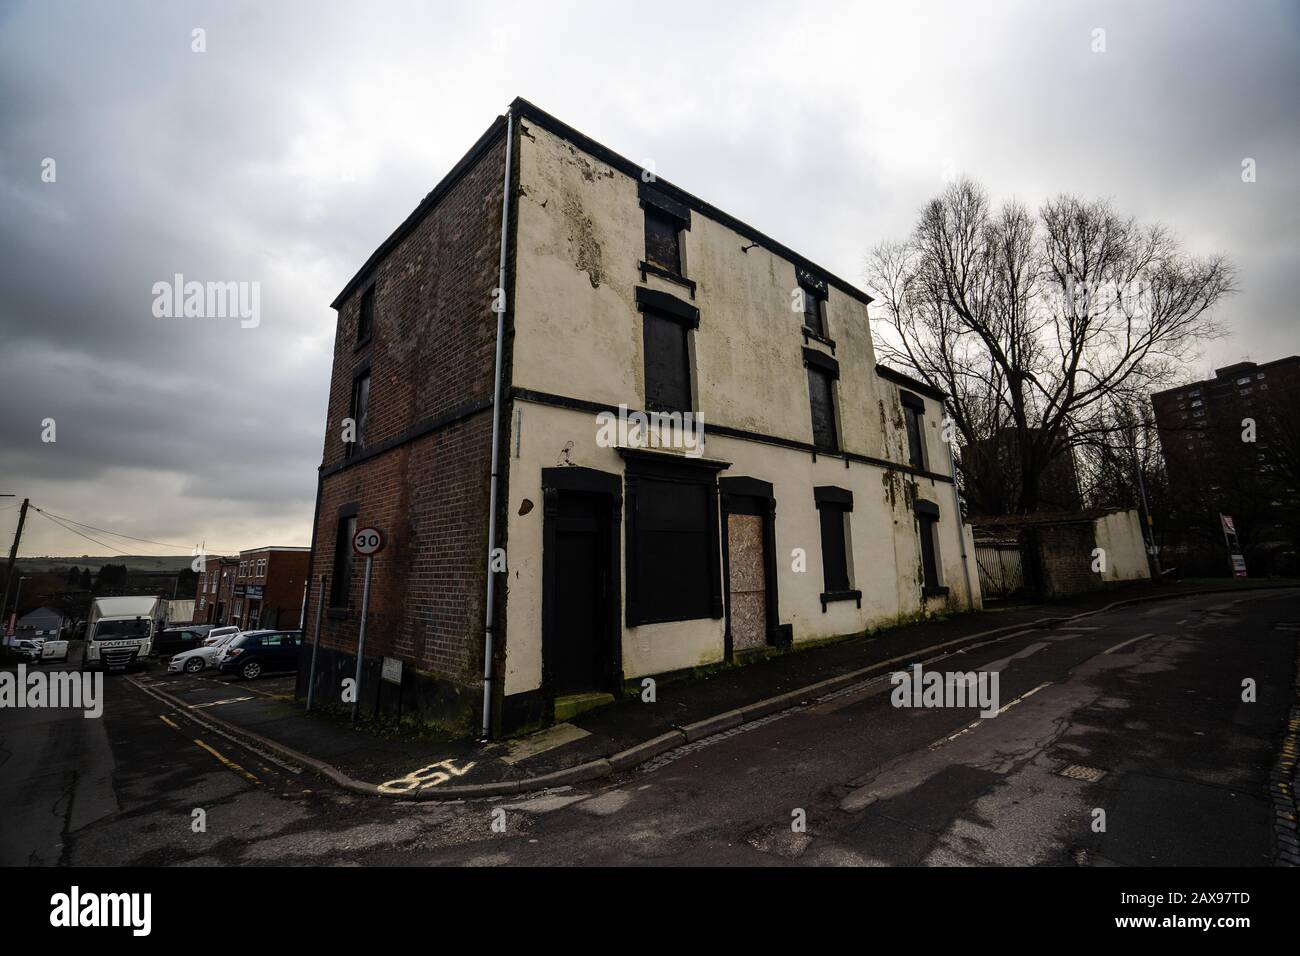 An old Public house closed down business, shops and independently run stores just outside the city centre of Hanley, Stoke on Trent, Urban decline Stock Photo